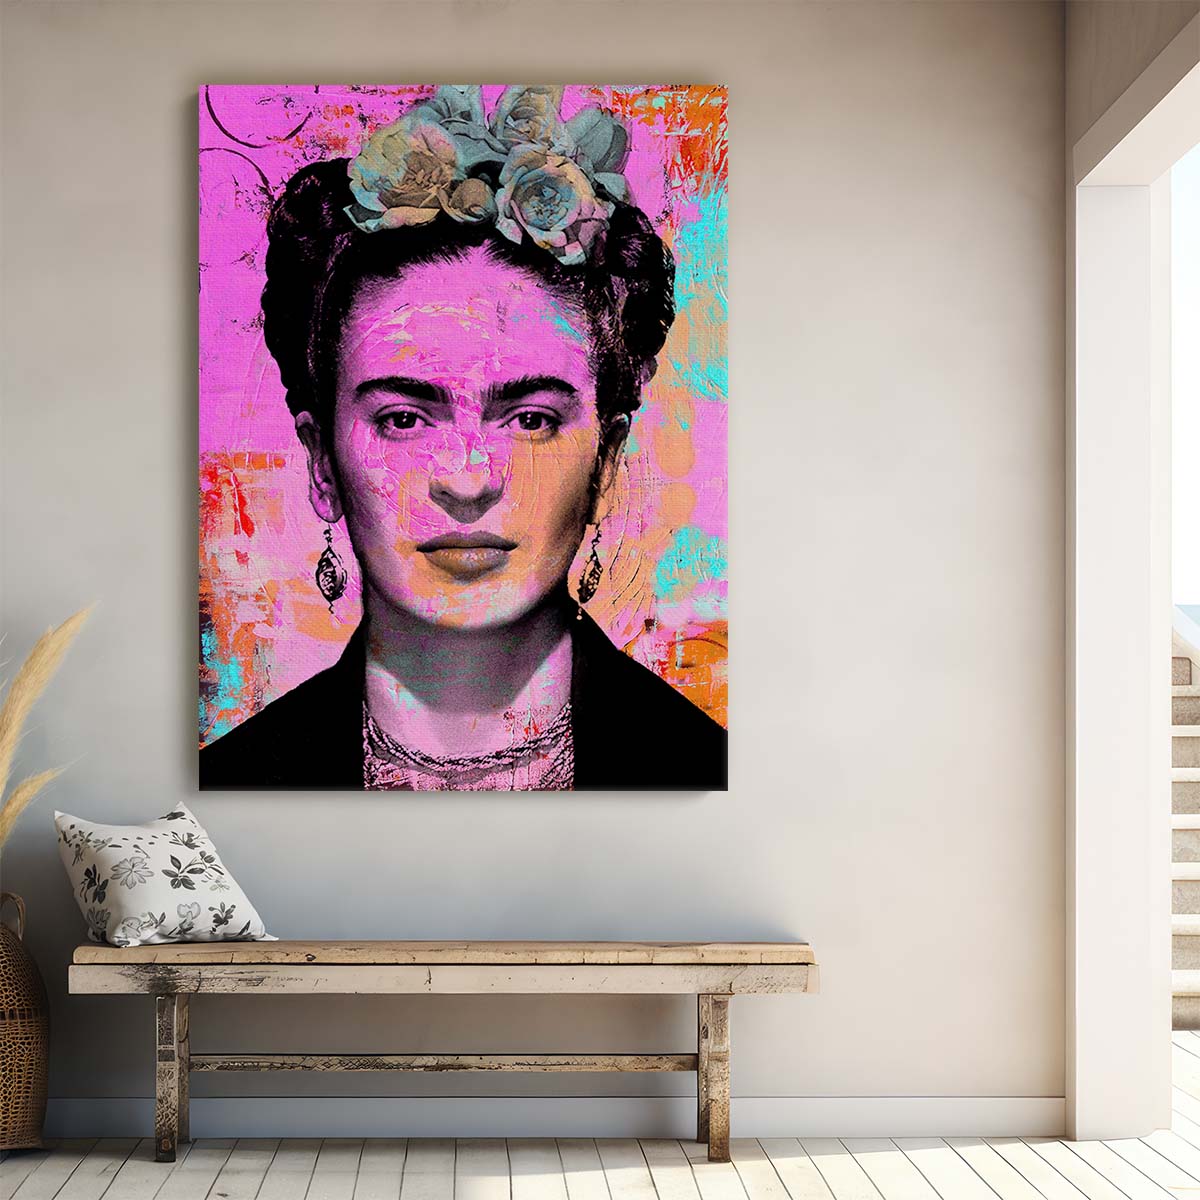 Frida Kahlo Portrait Circles Graffiti Wall Art by Luxuriance Designs. Made in USA.